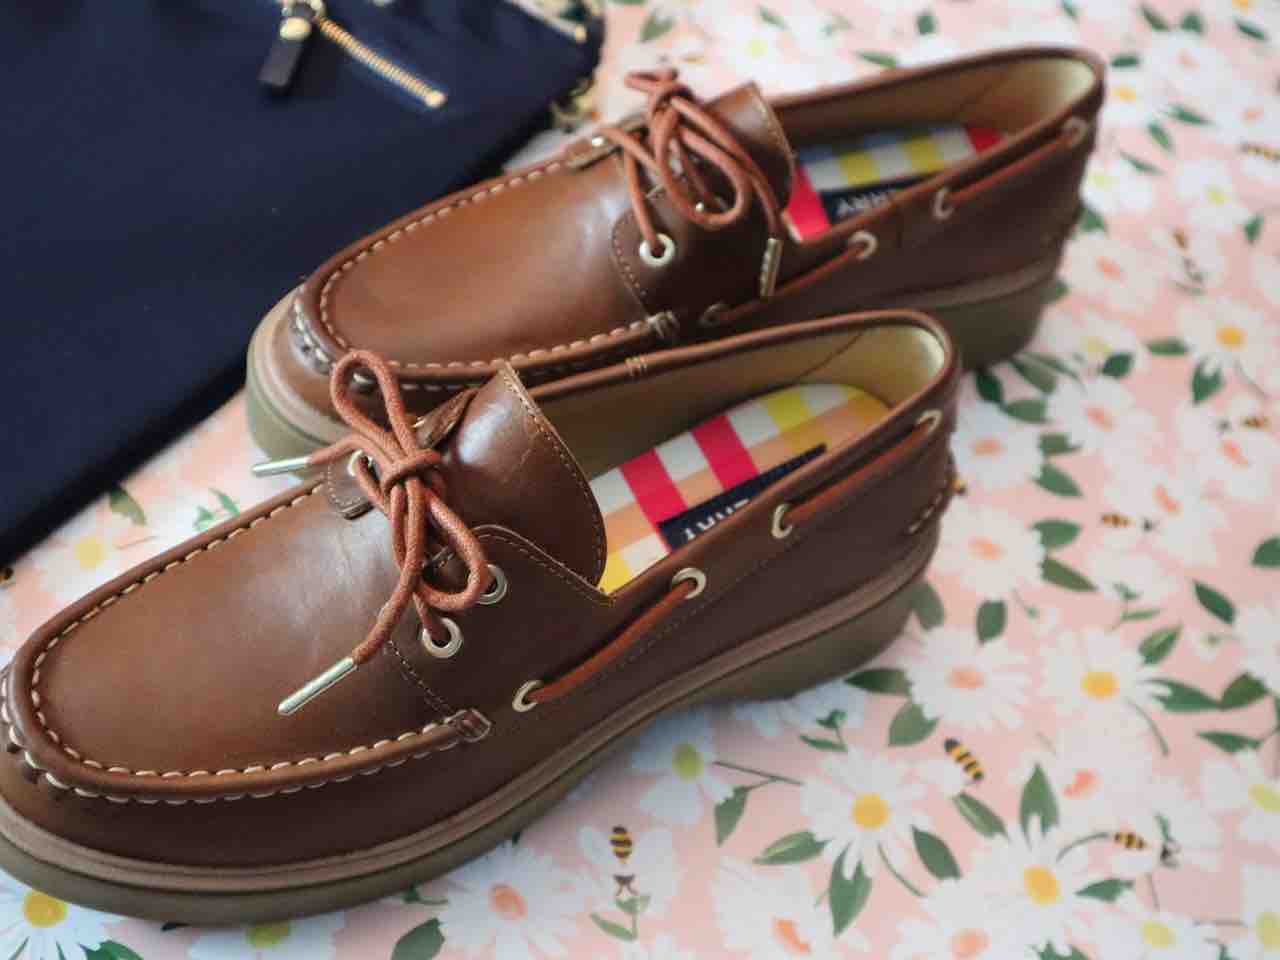 Sperry Bayside Boat Shoe Is One Of The Best Mother’s Day Gift For New Moms